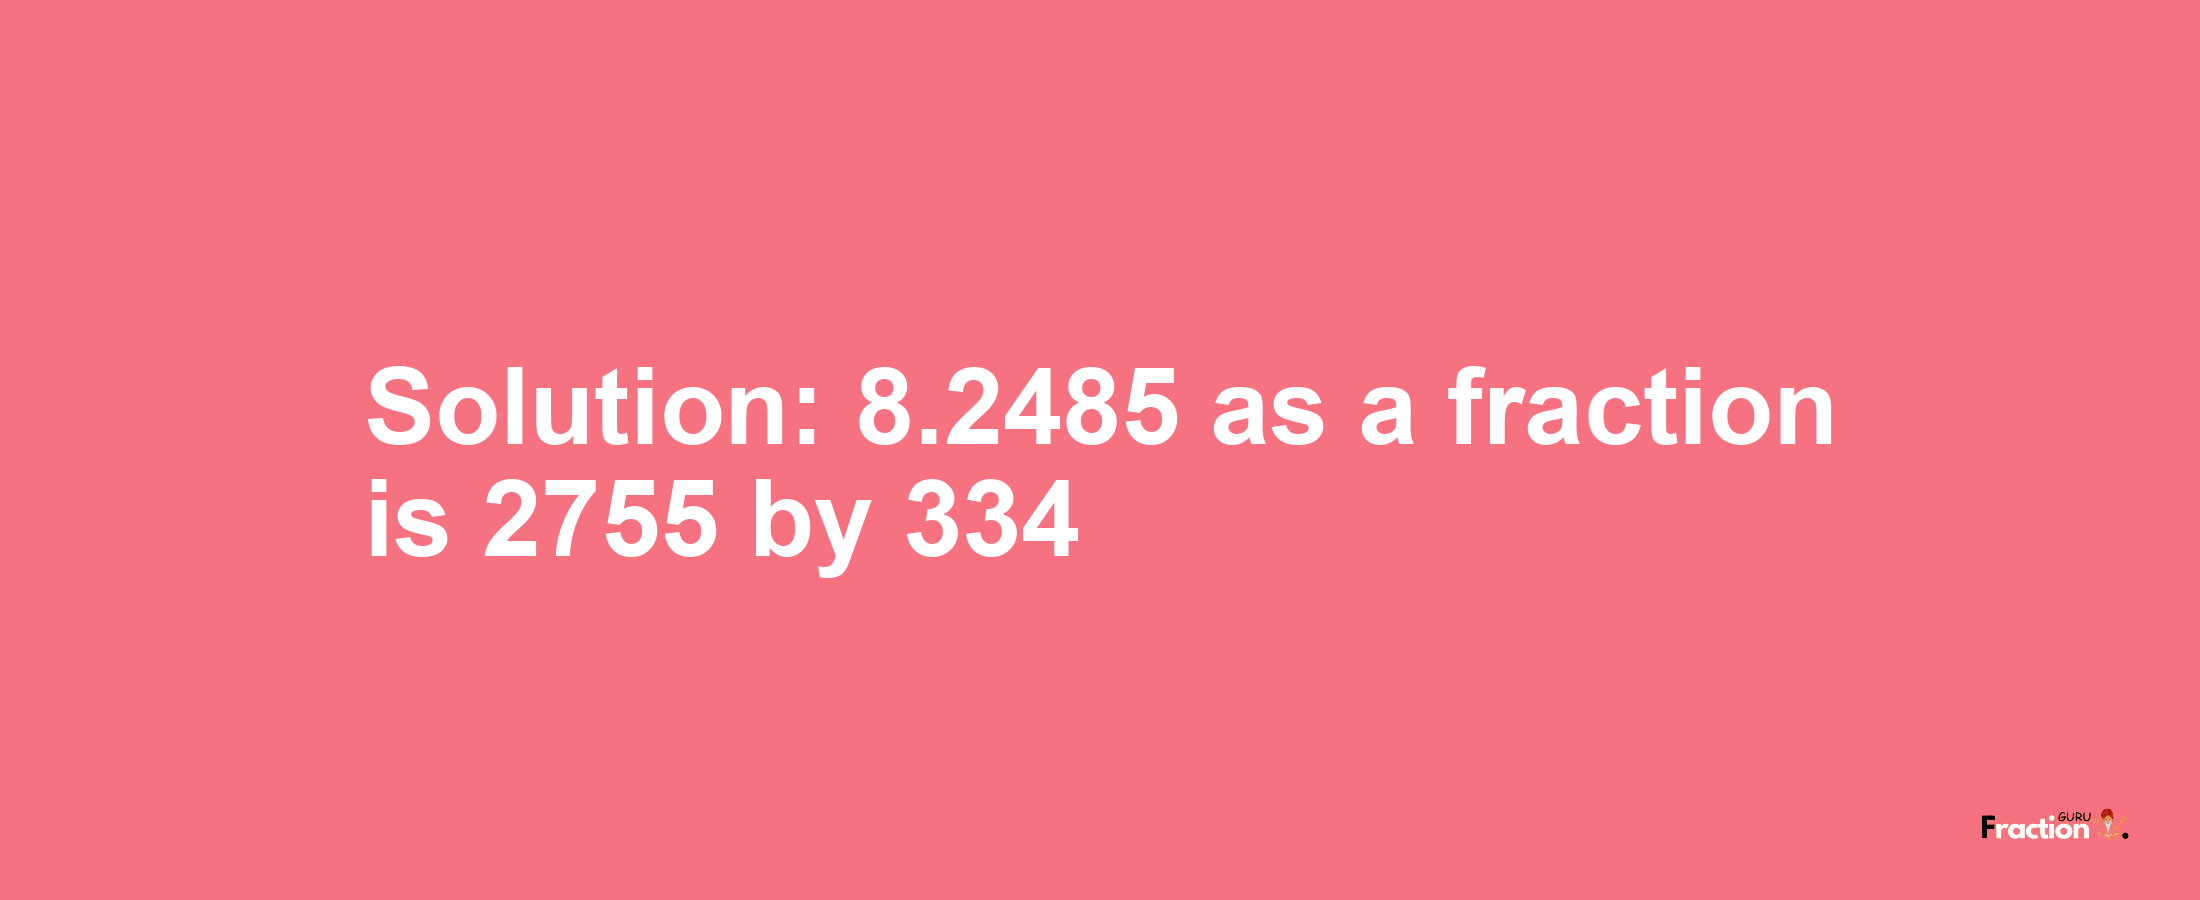 Solution:8.2485 as a fraction is 2755/334